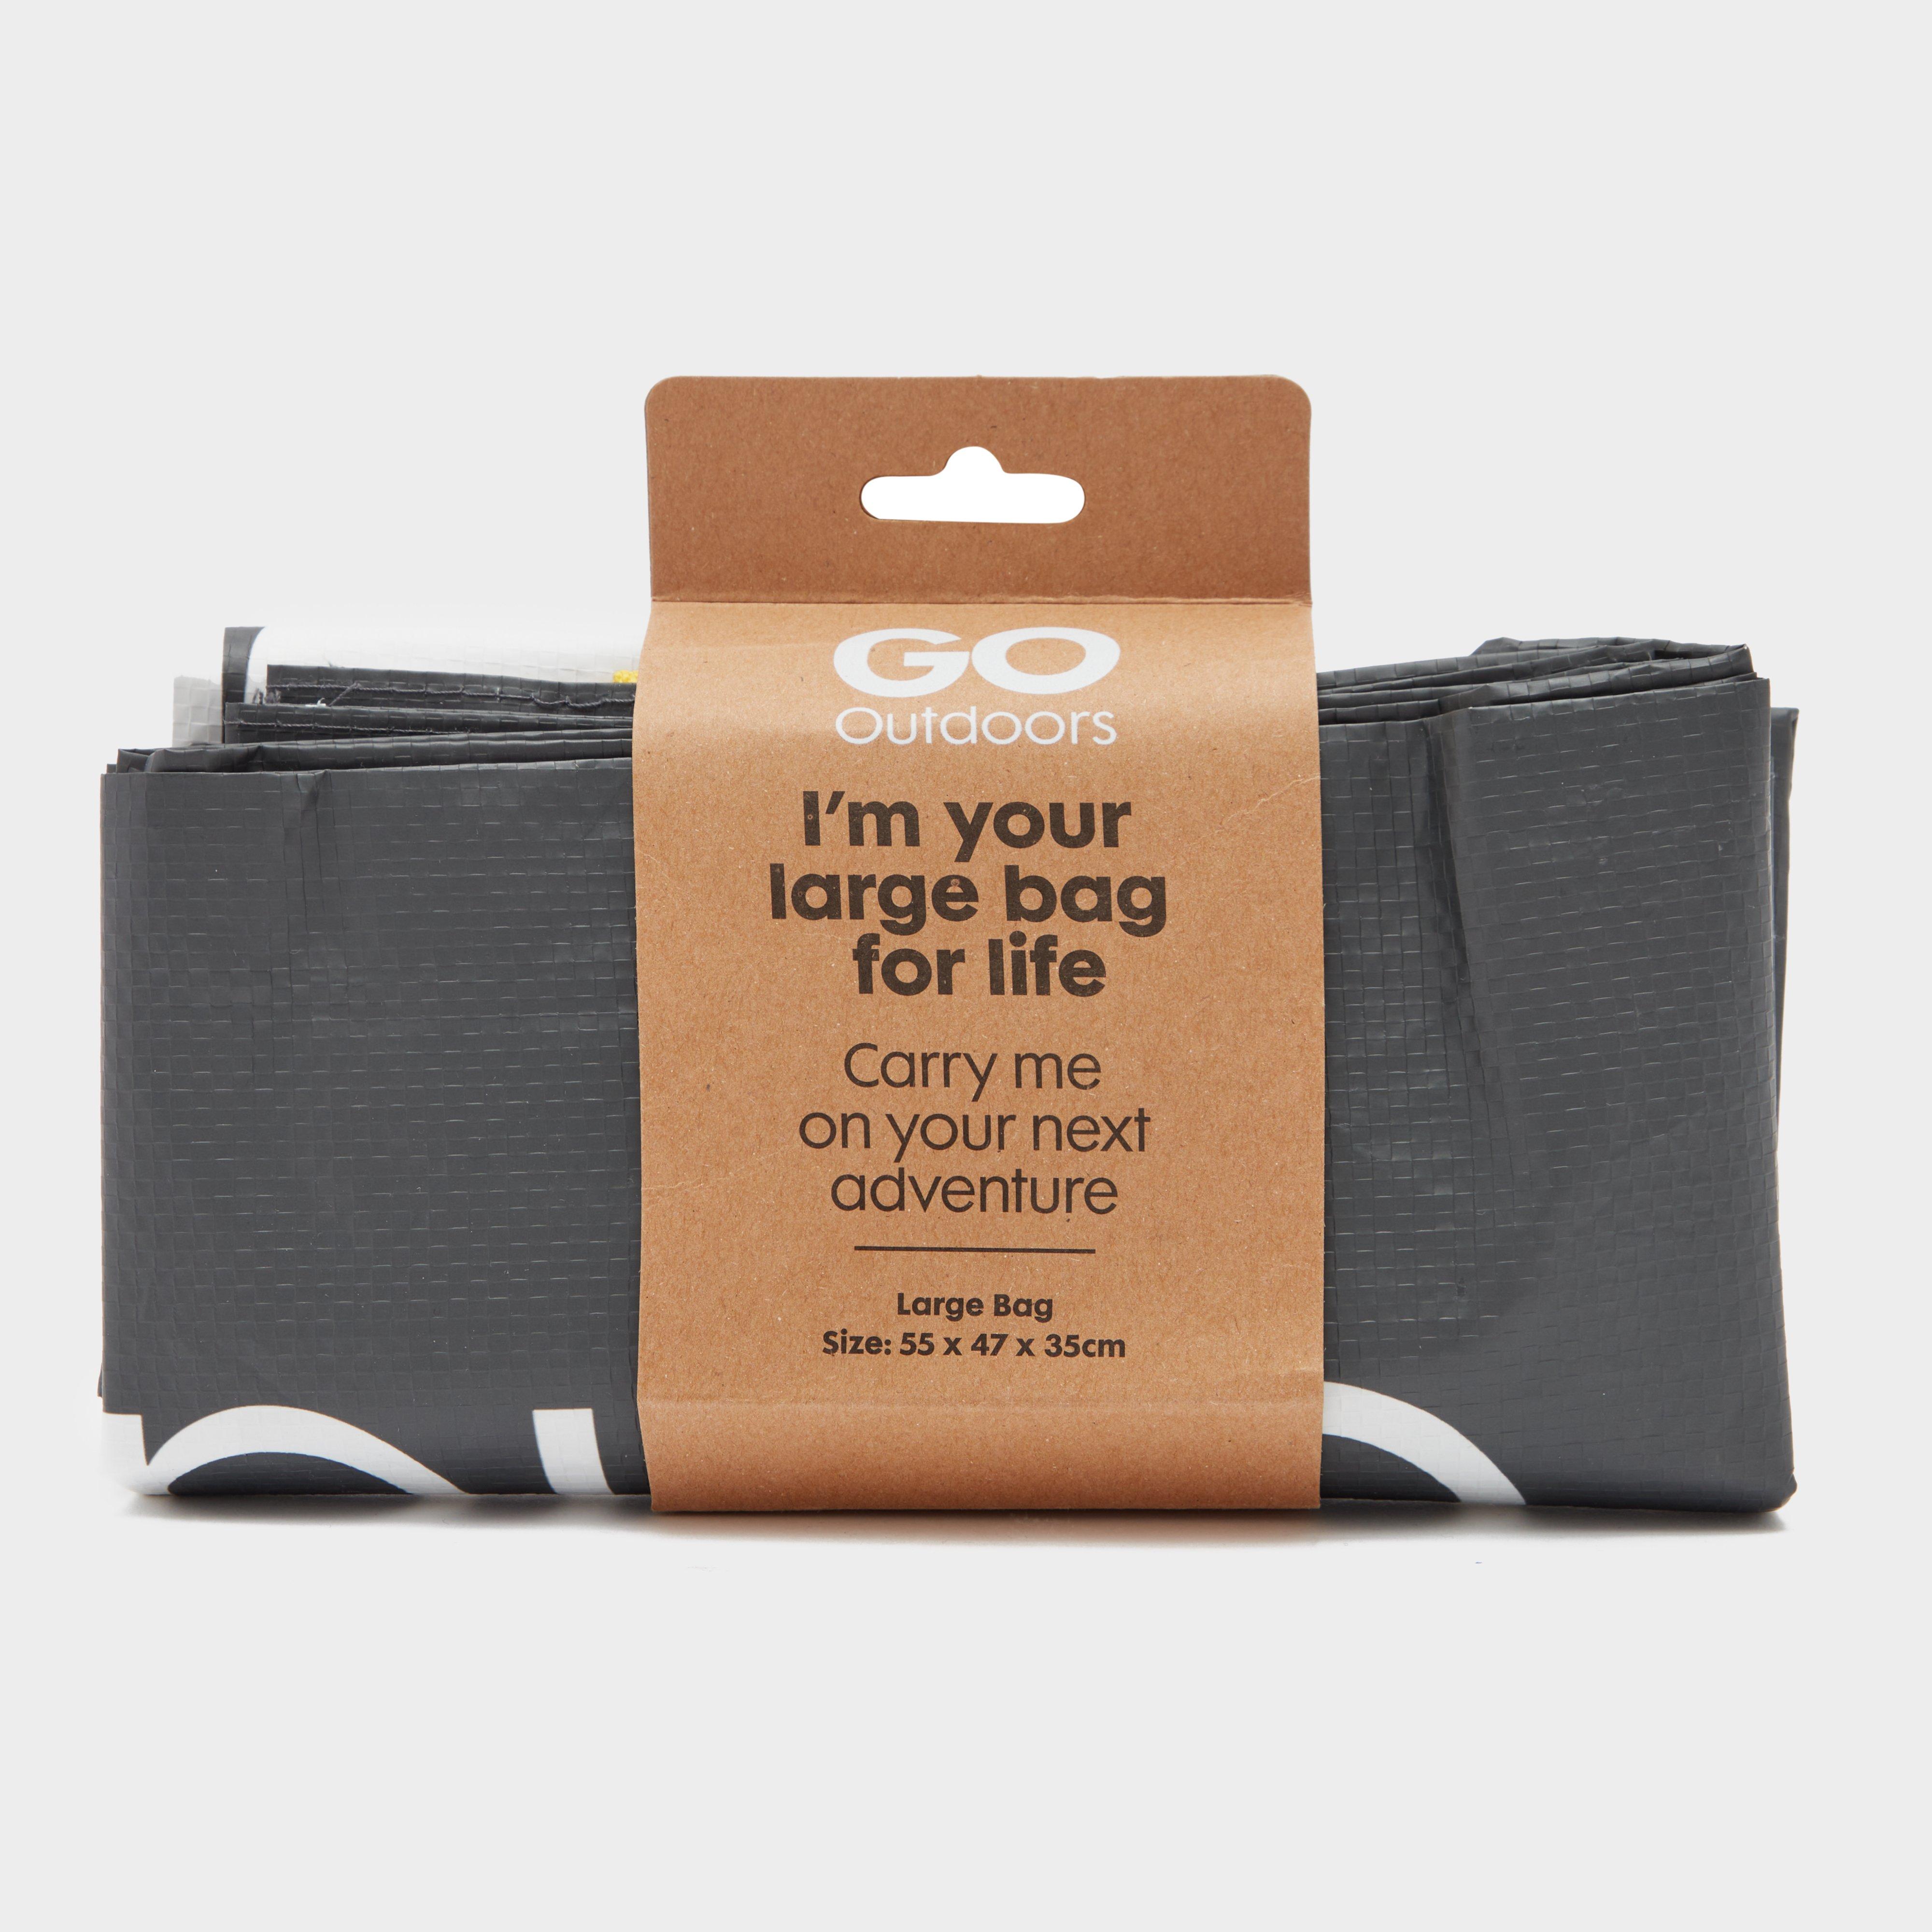 Go Outdoors GO OUTDOORS Large Bag For Life, Grey